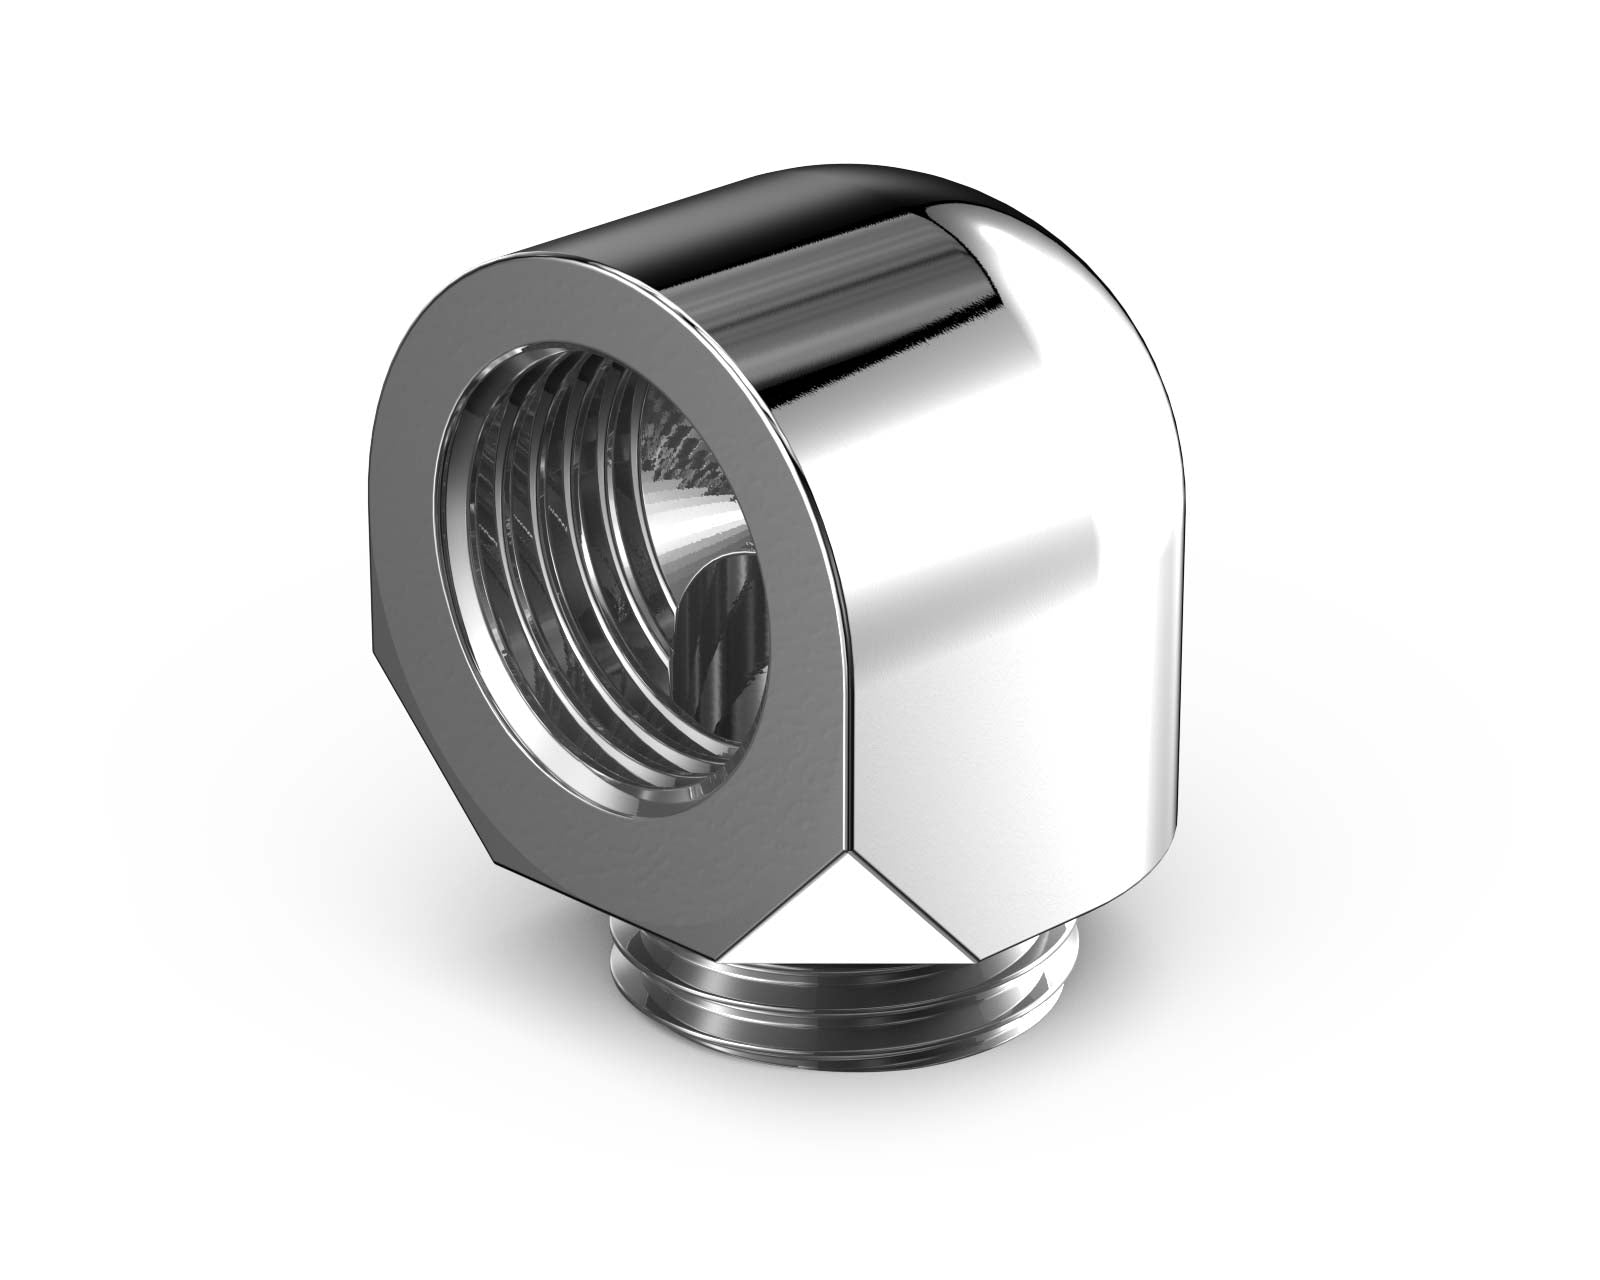 PrimoChill Male to Female G 1/4in. 90 Degree SX Elbow Fitting - PrimoChill - KEEPING IT COOL Silver Nickel